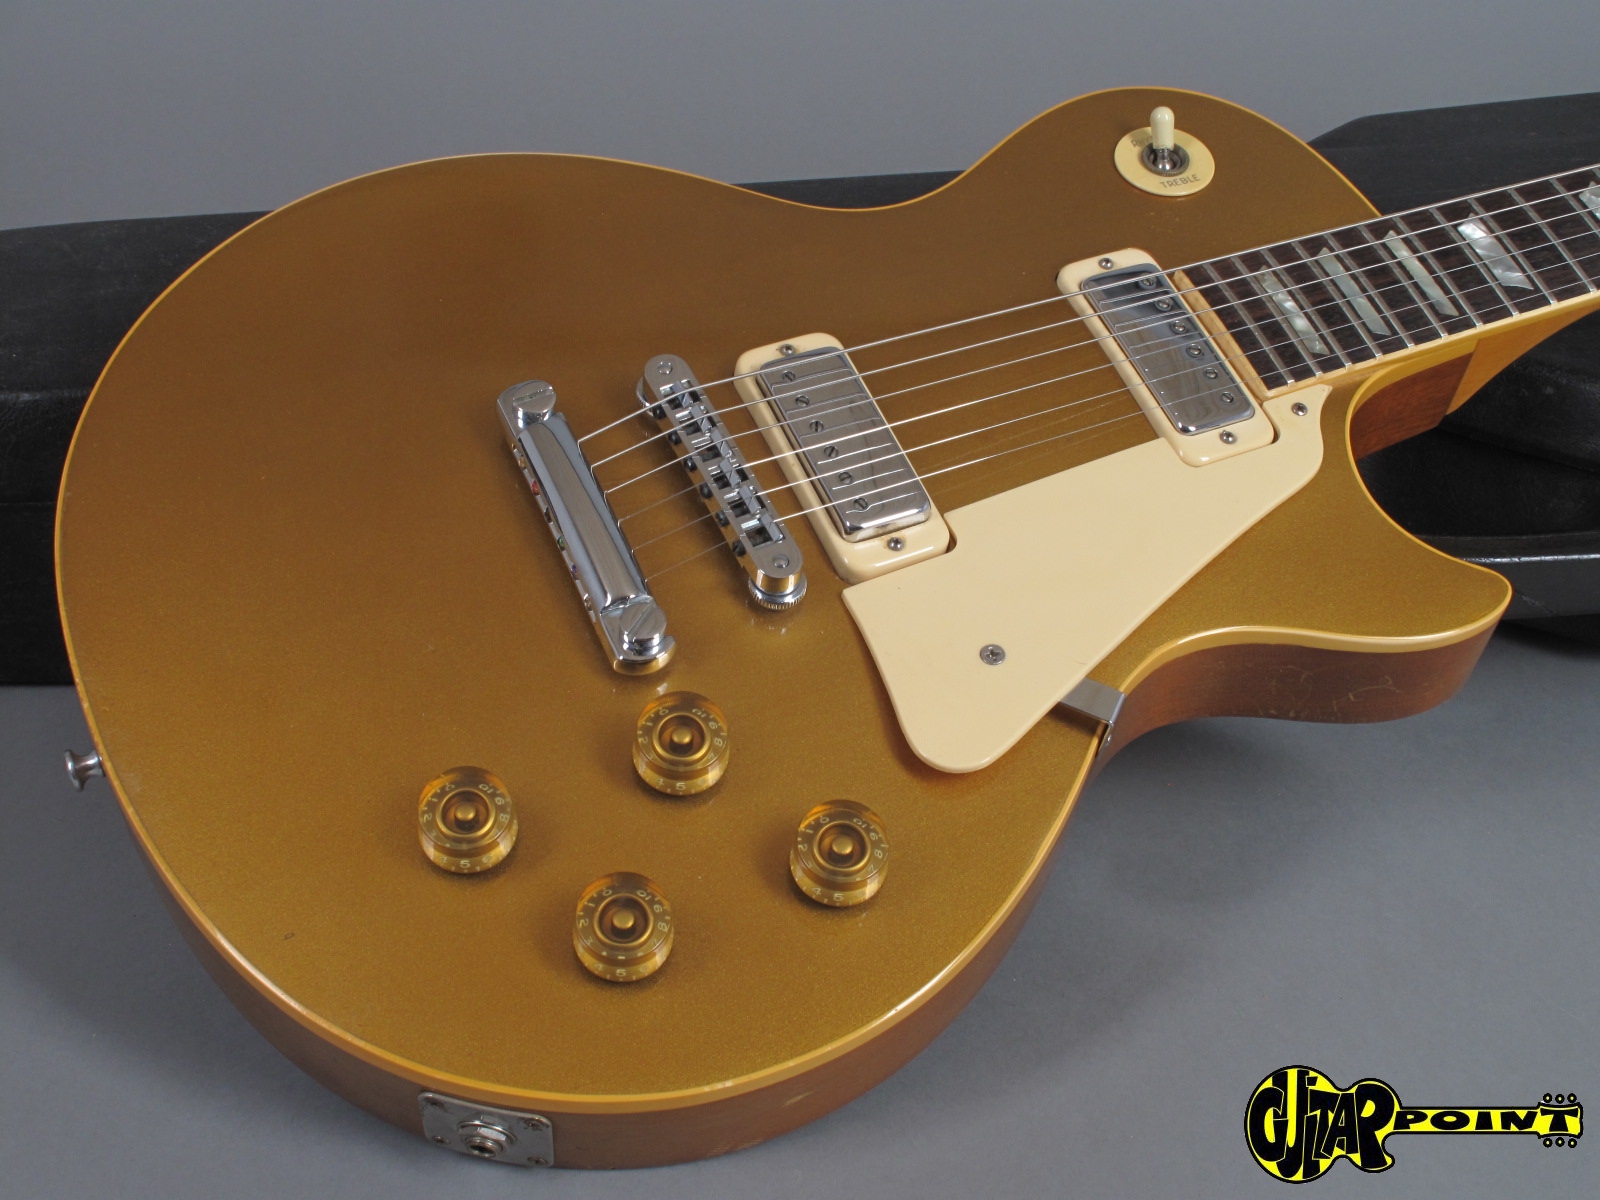 1979 gibson les paul deluxe